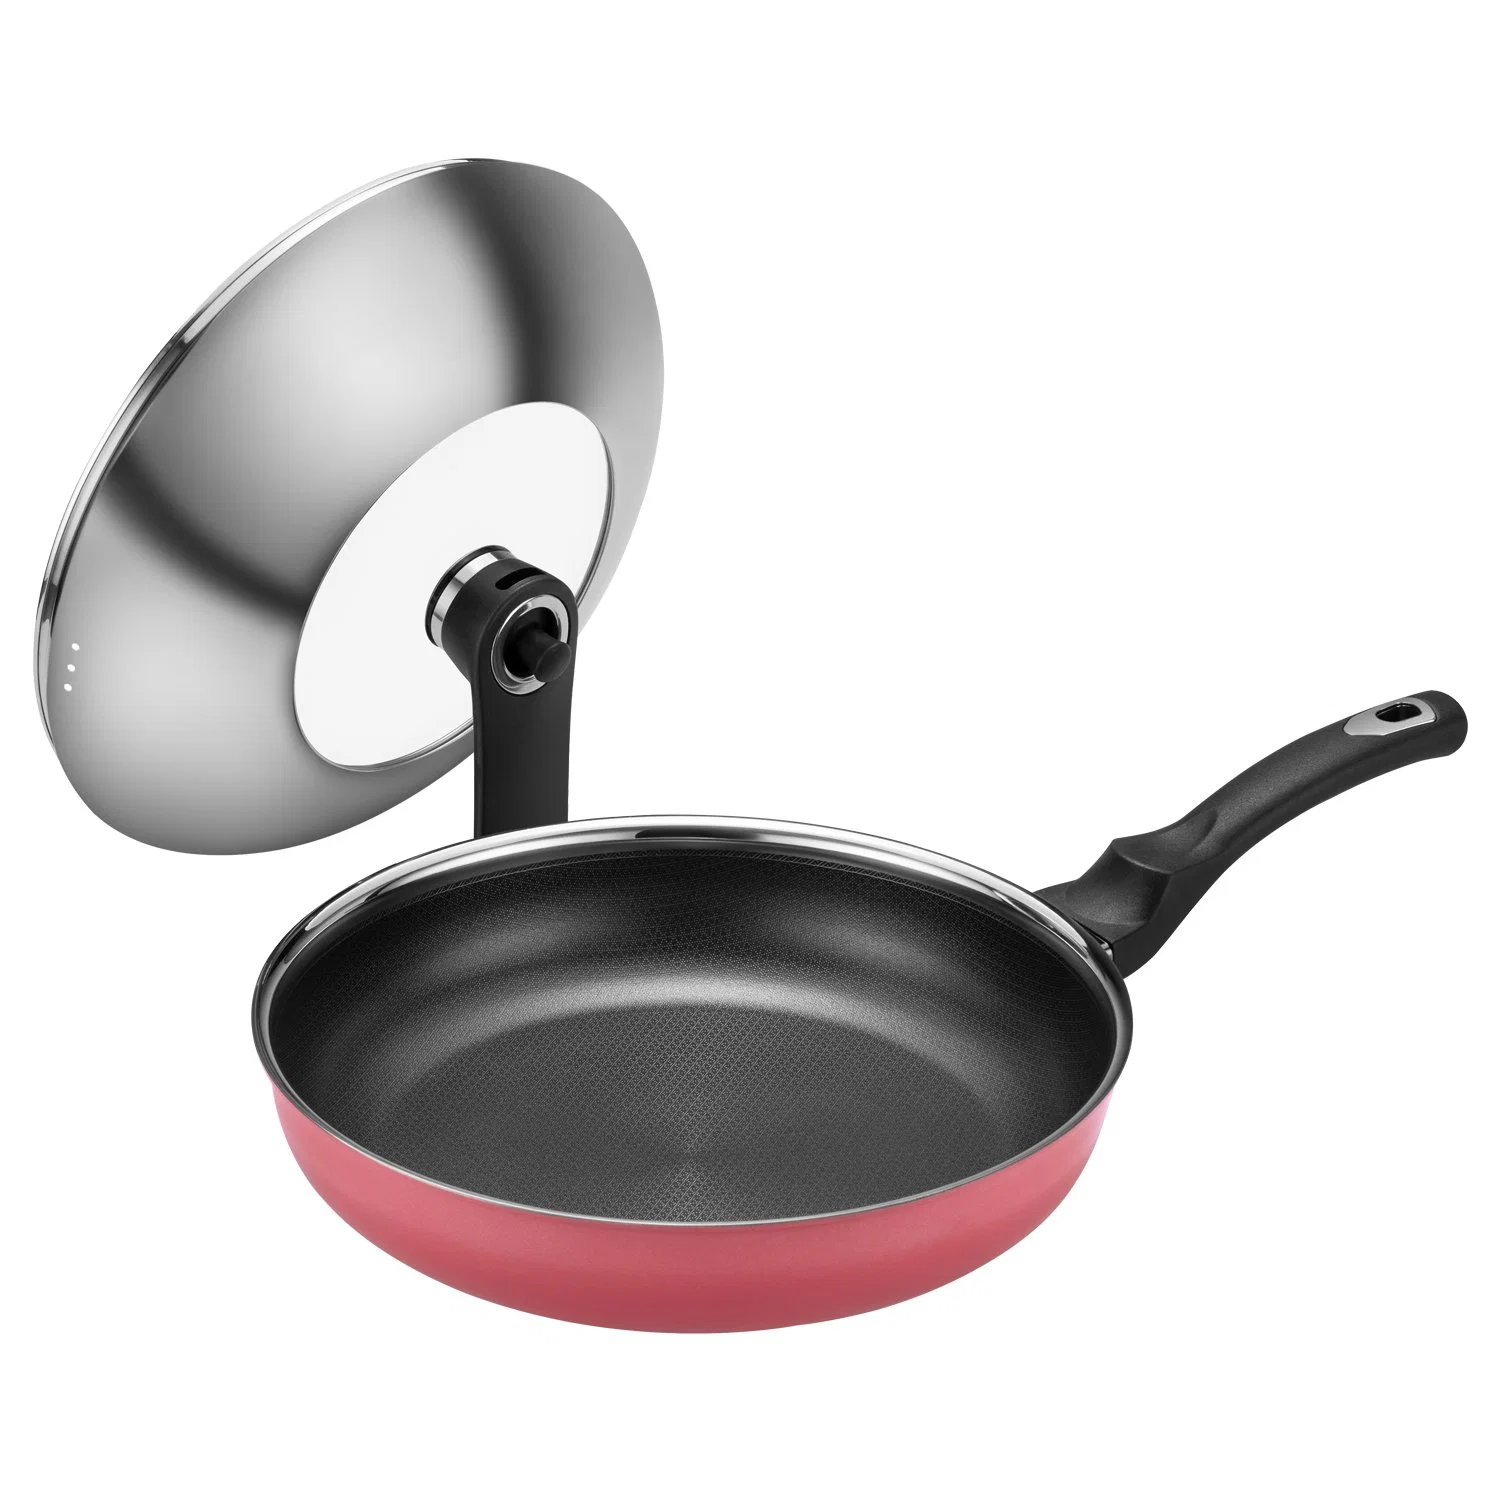 Best Seller Cookware Non-Stick Coating Stainless Steel Ceramic Outer Layer 30cm Frying Pan